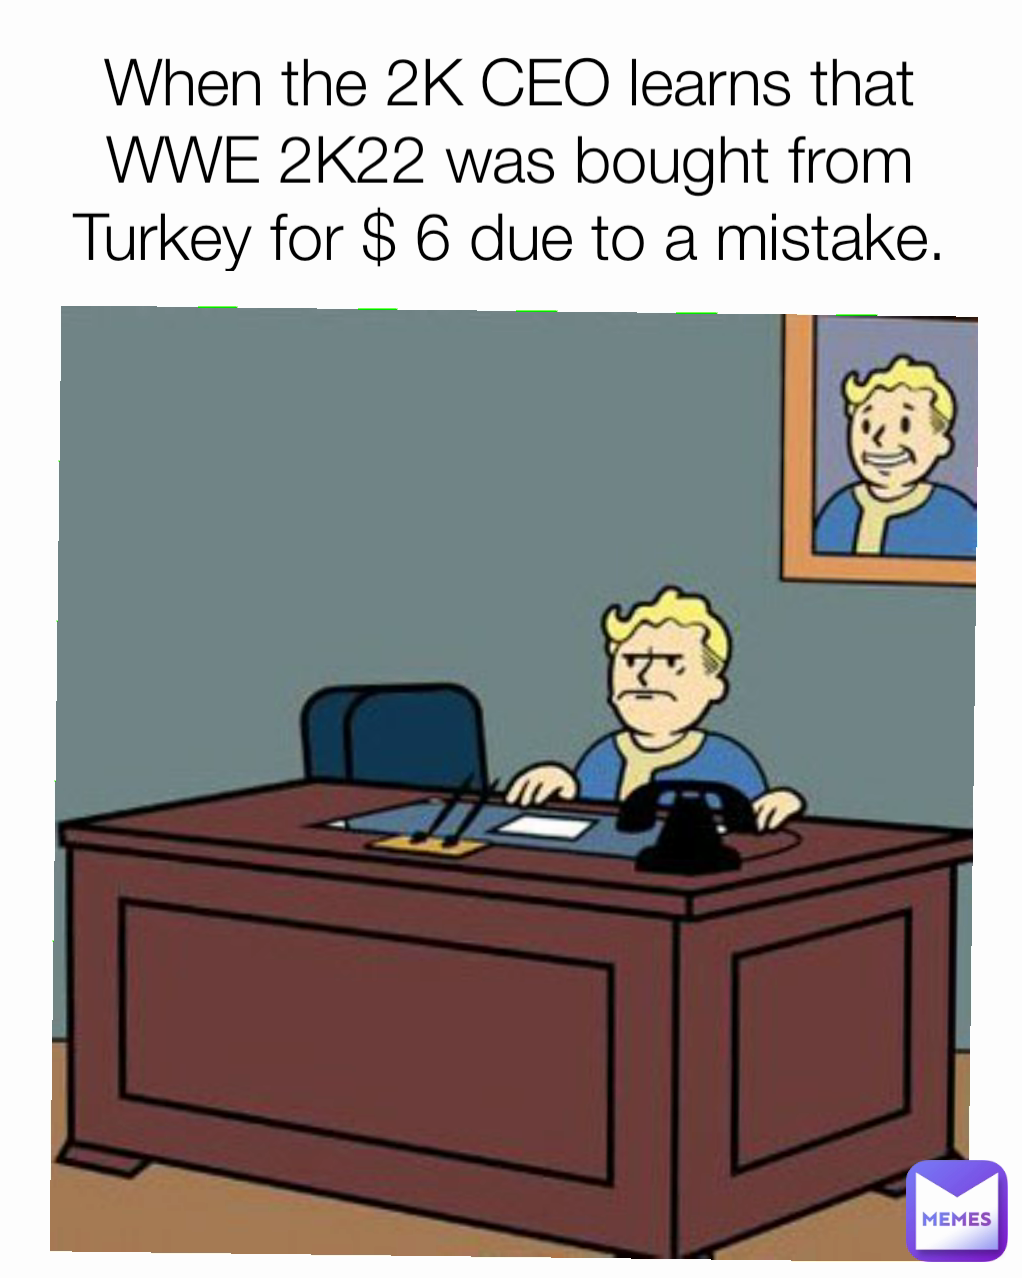 When the 2K CEO learns that WWE 2K22 was bought from Turkey for $ 6 due to a mistake.